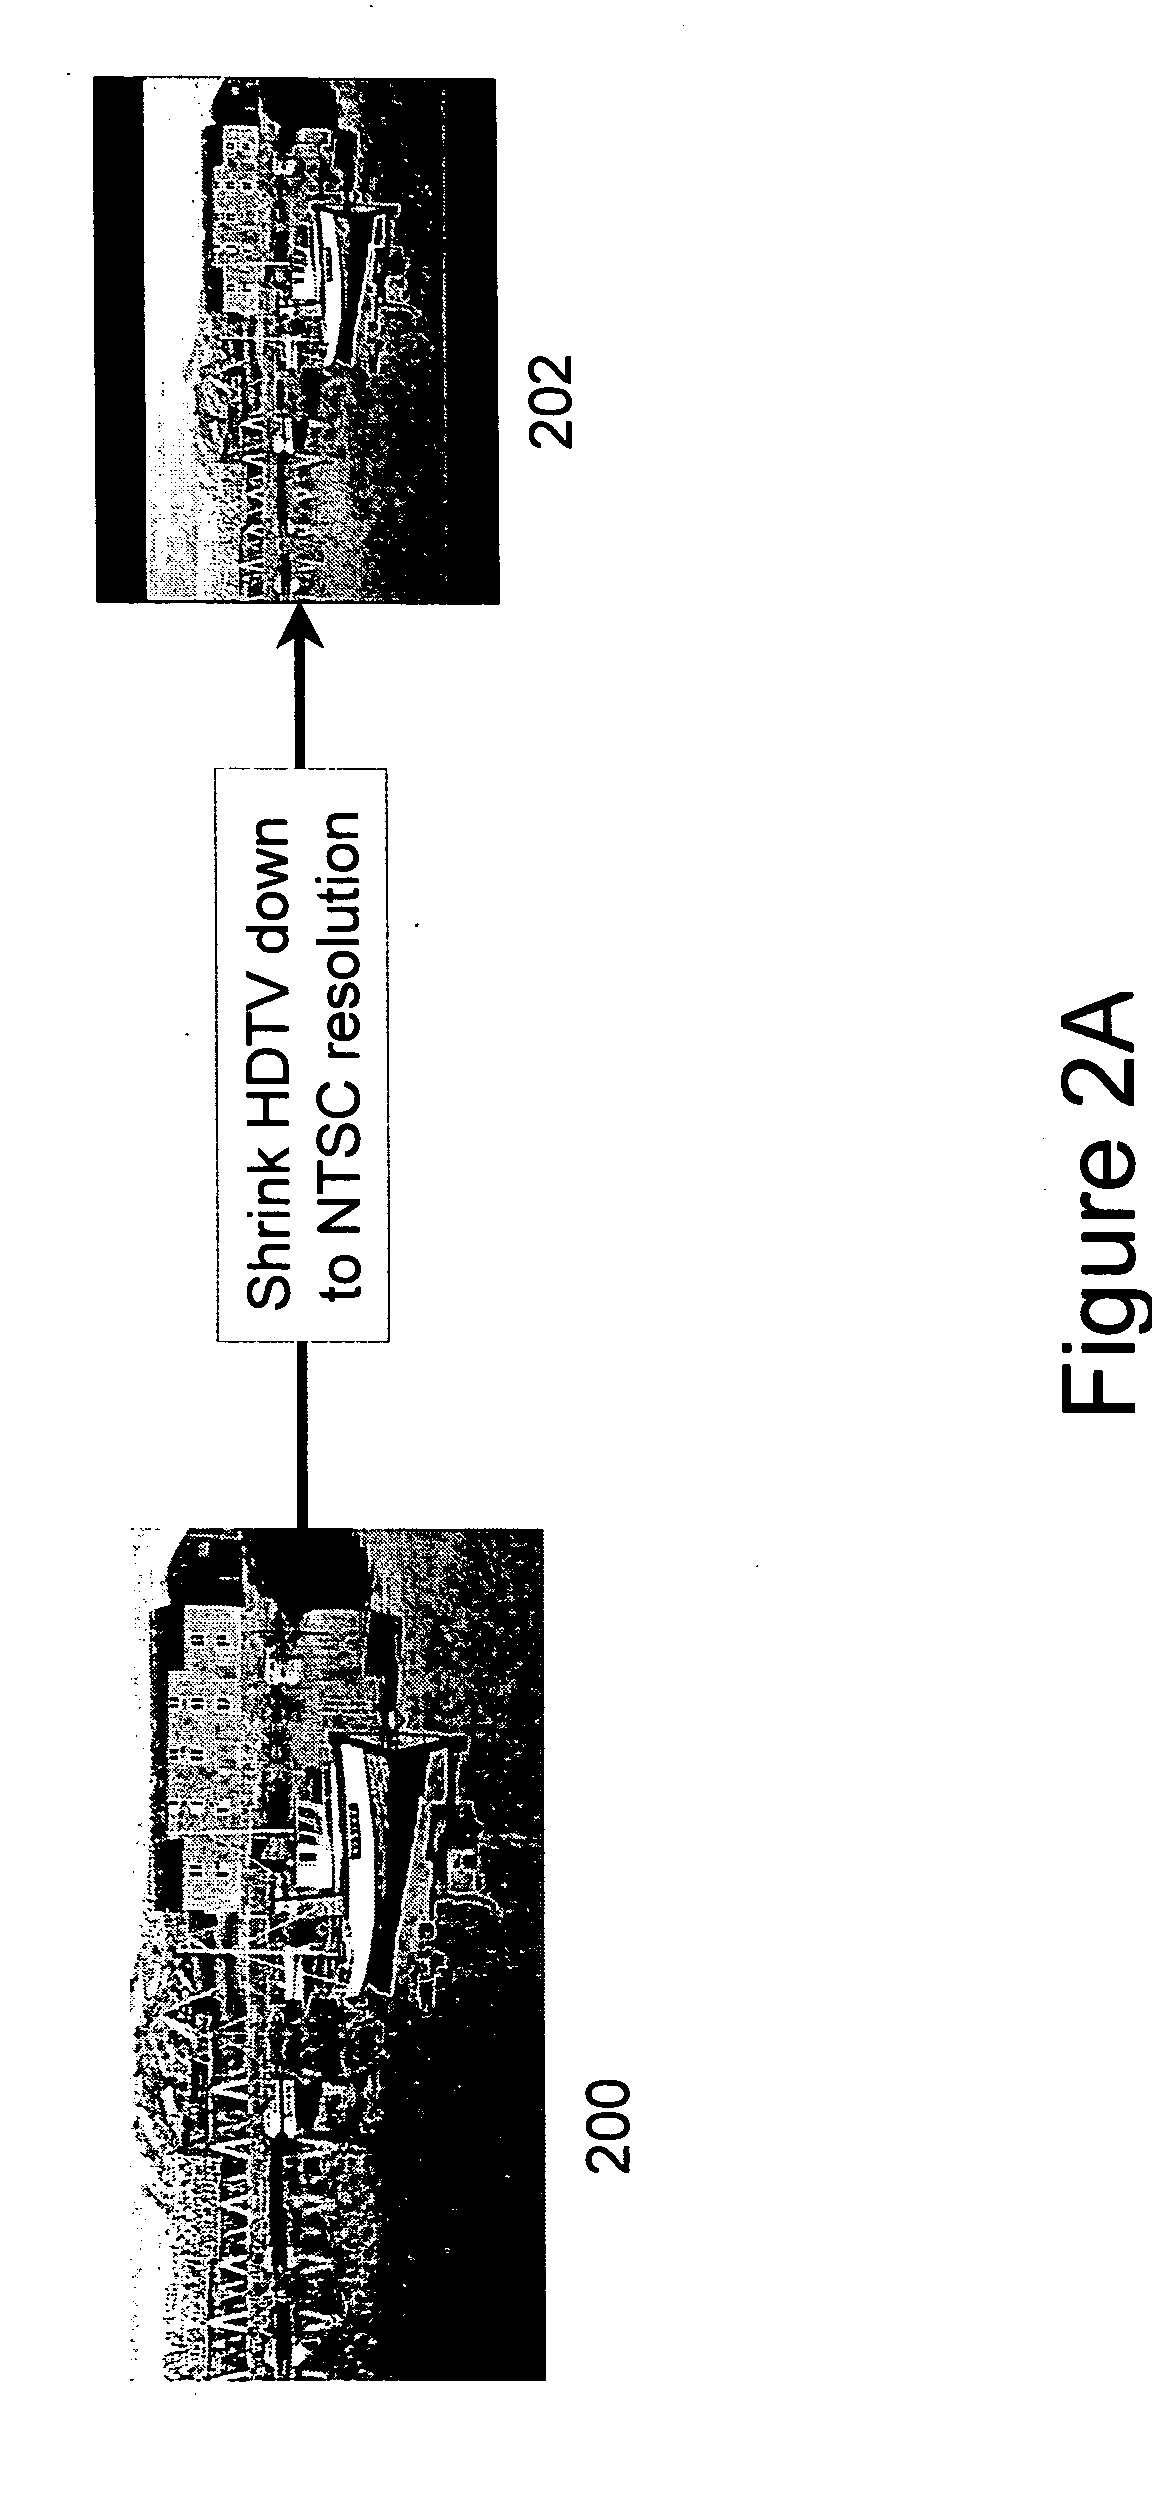 System and method for rapidly scaling and filtering video data